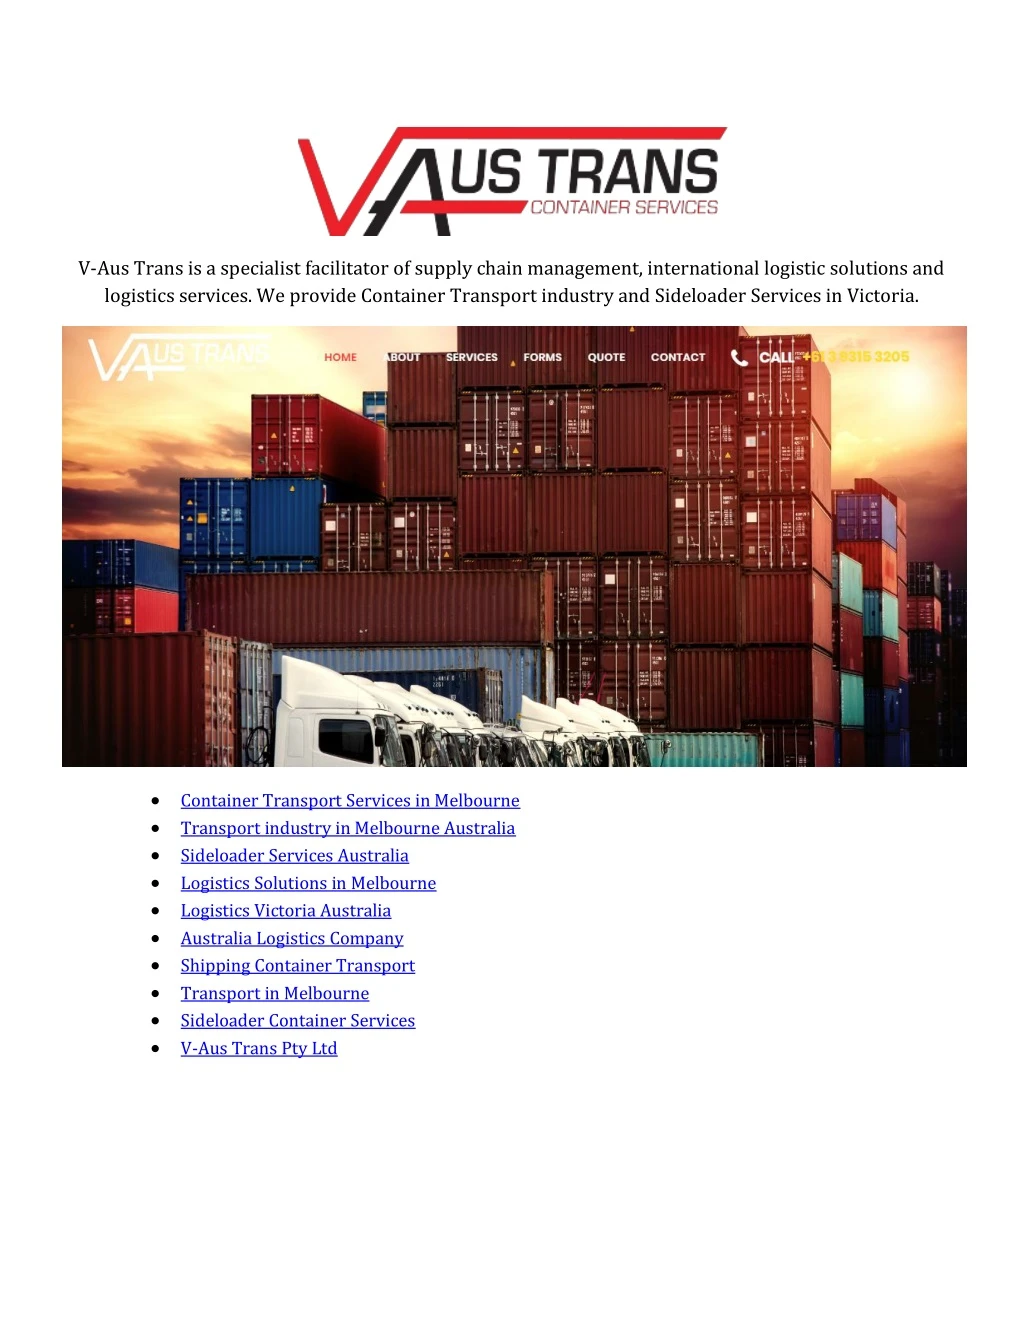 v aus trans is a specialist facilitator of supply